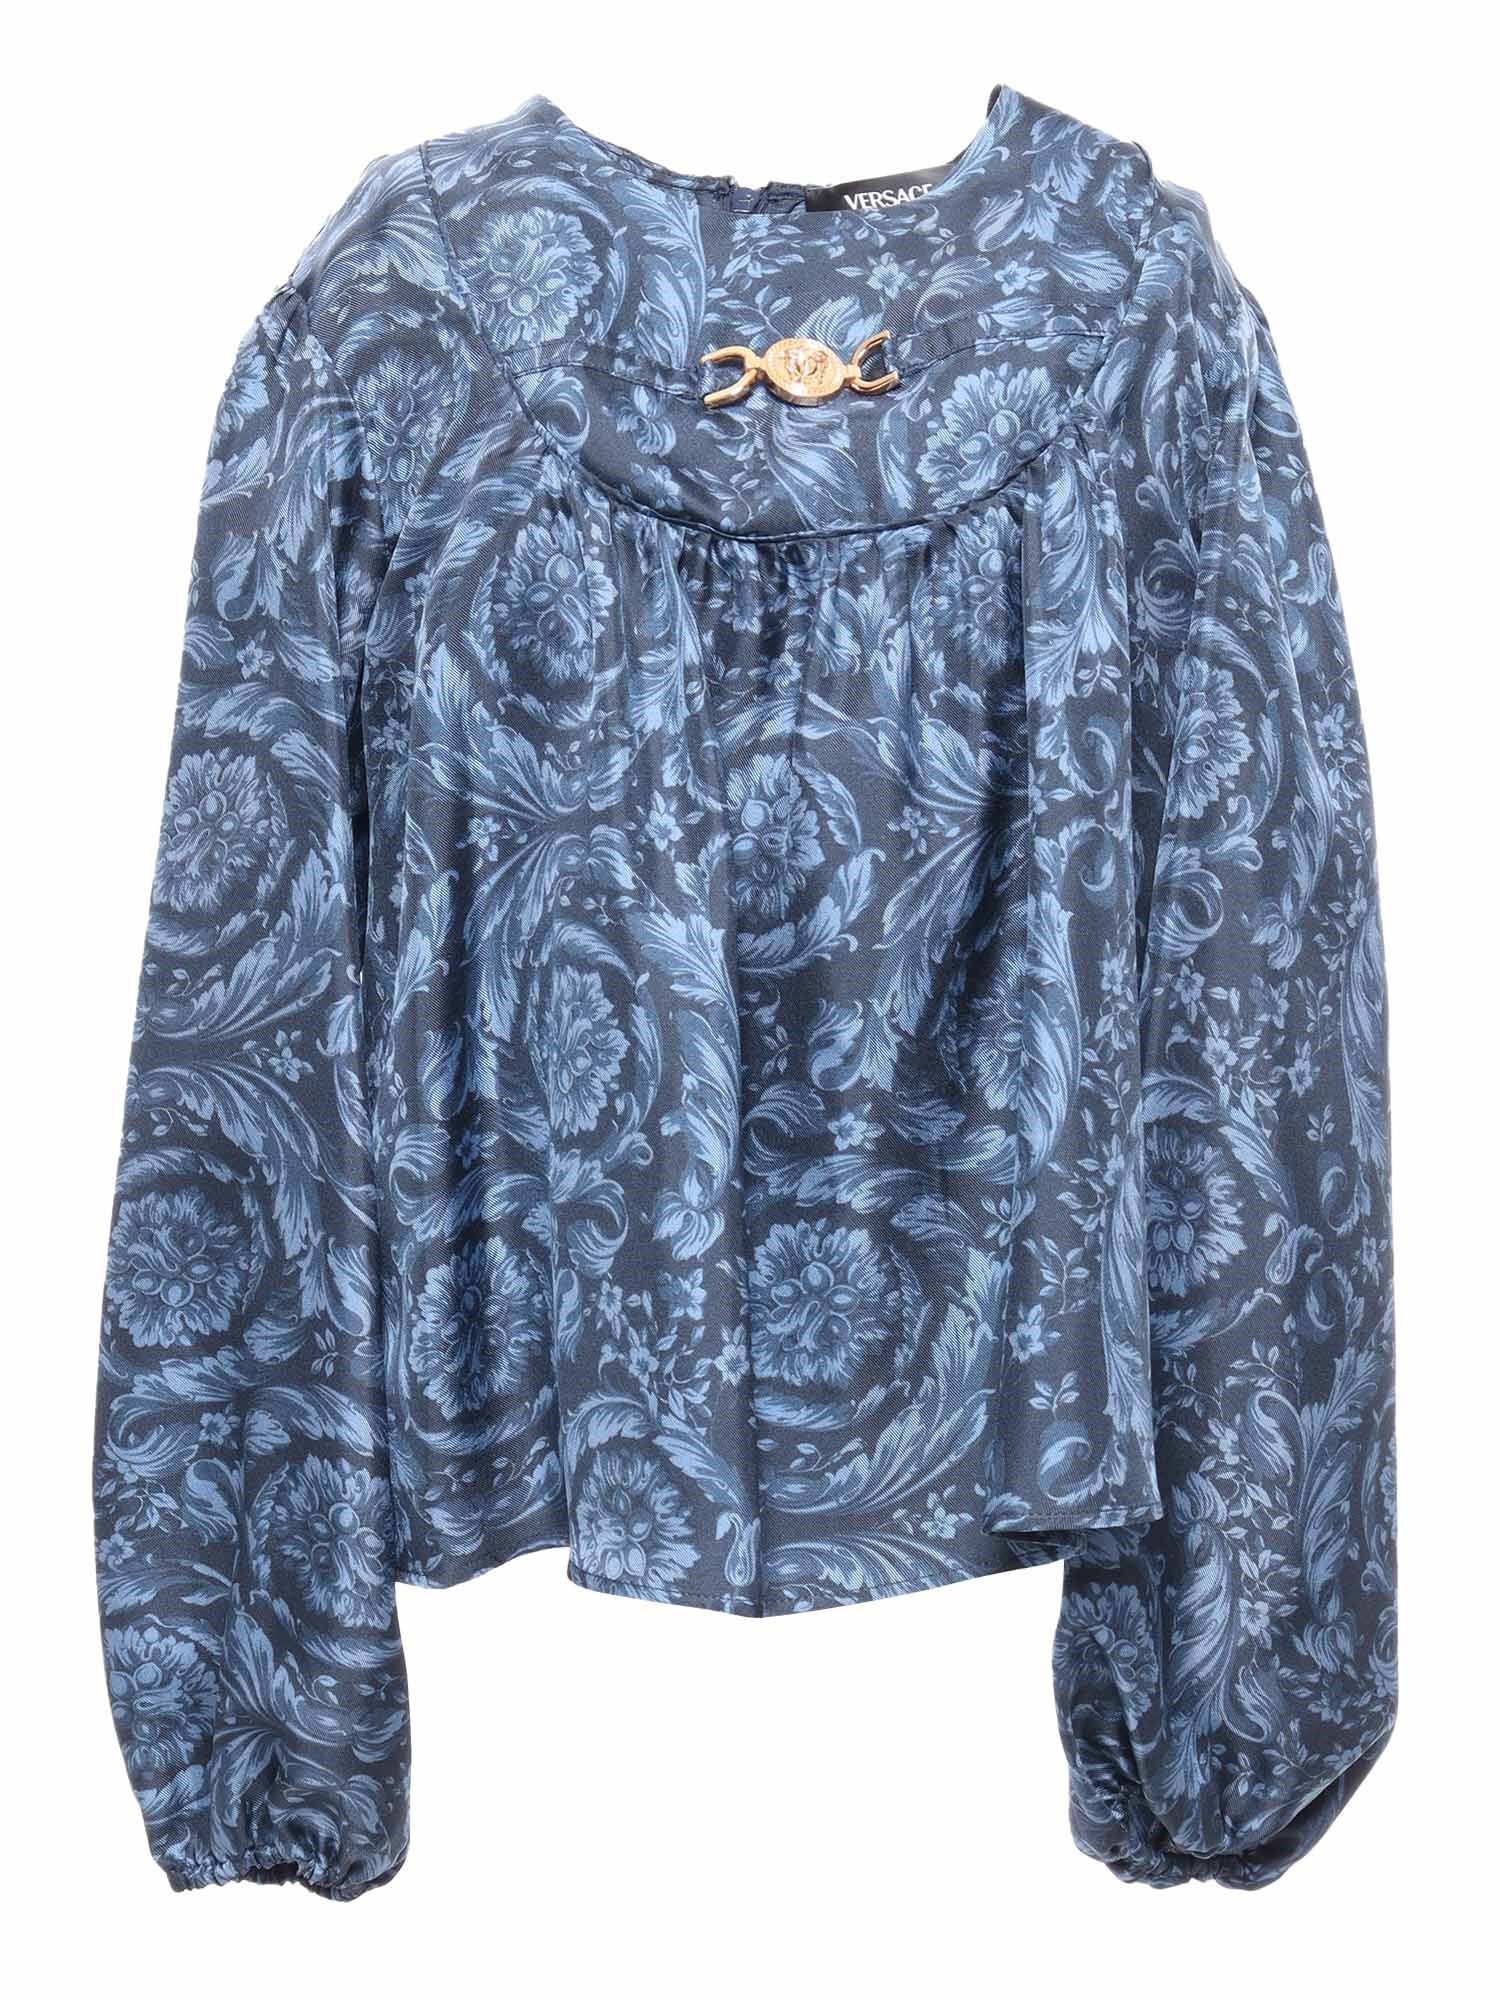 Versace Baroque Style Shirt In Blue